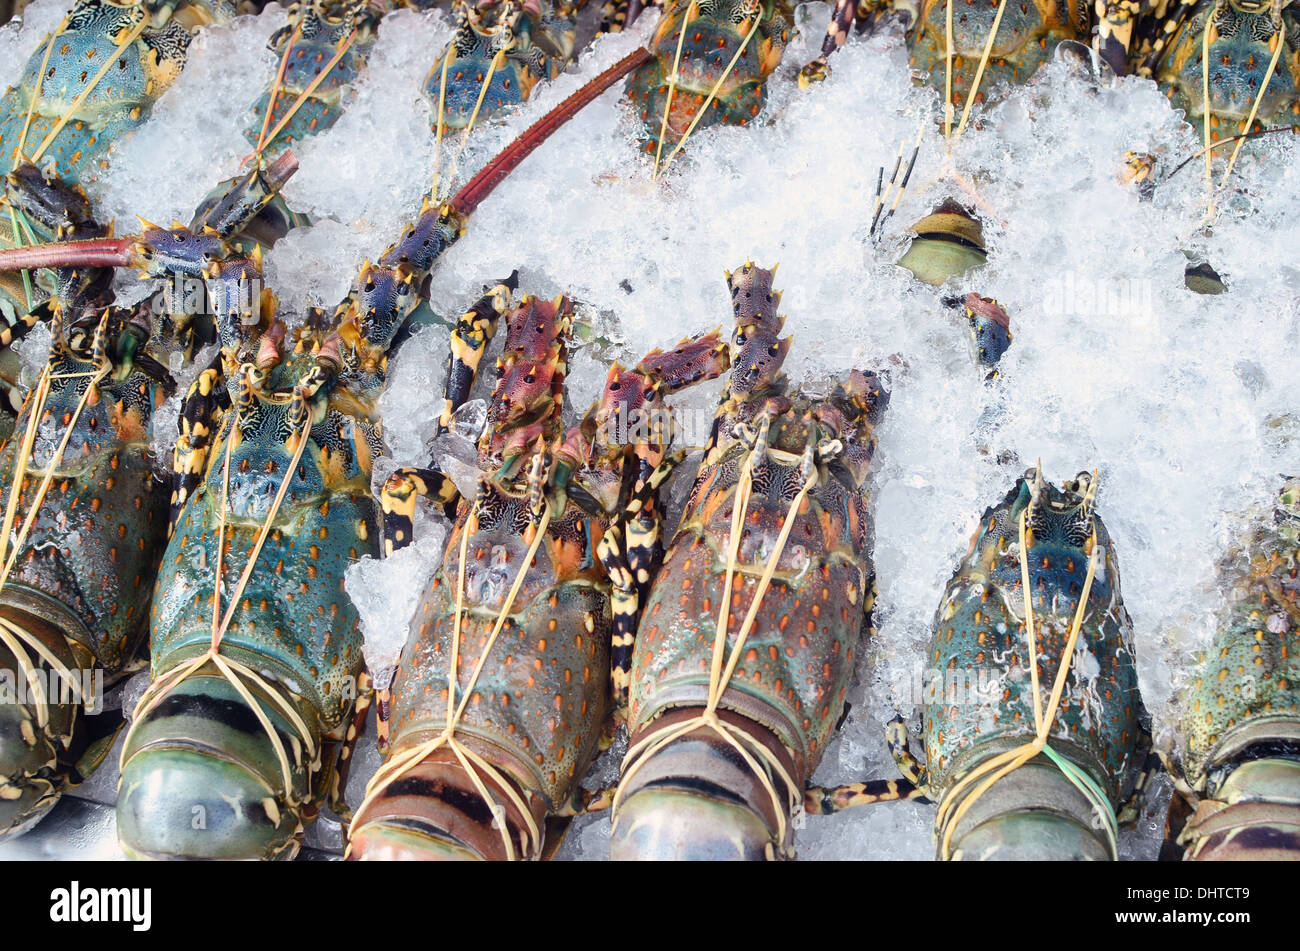 lobsters Stock Photo